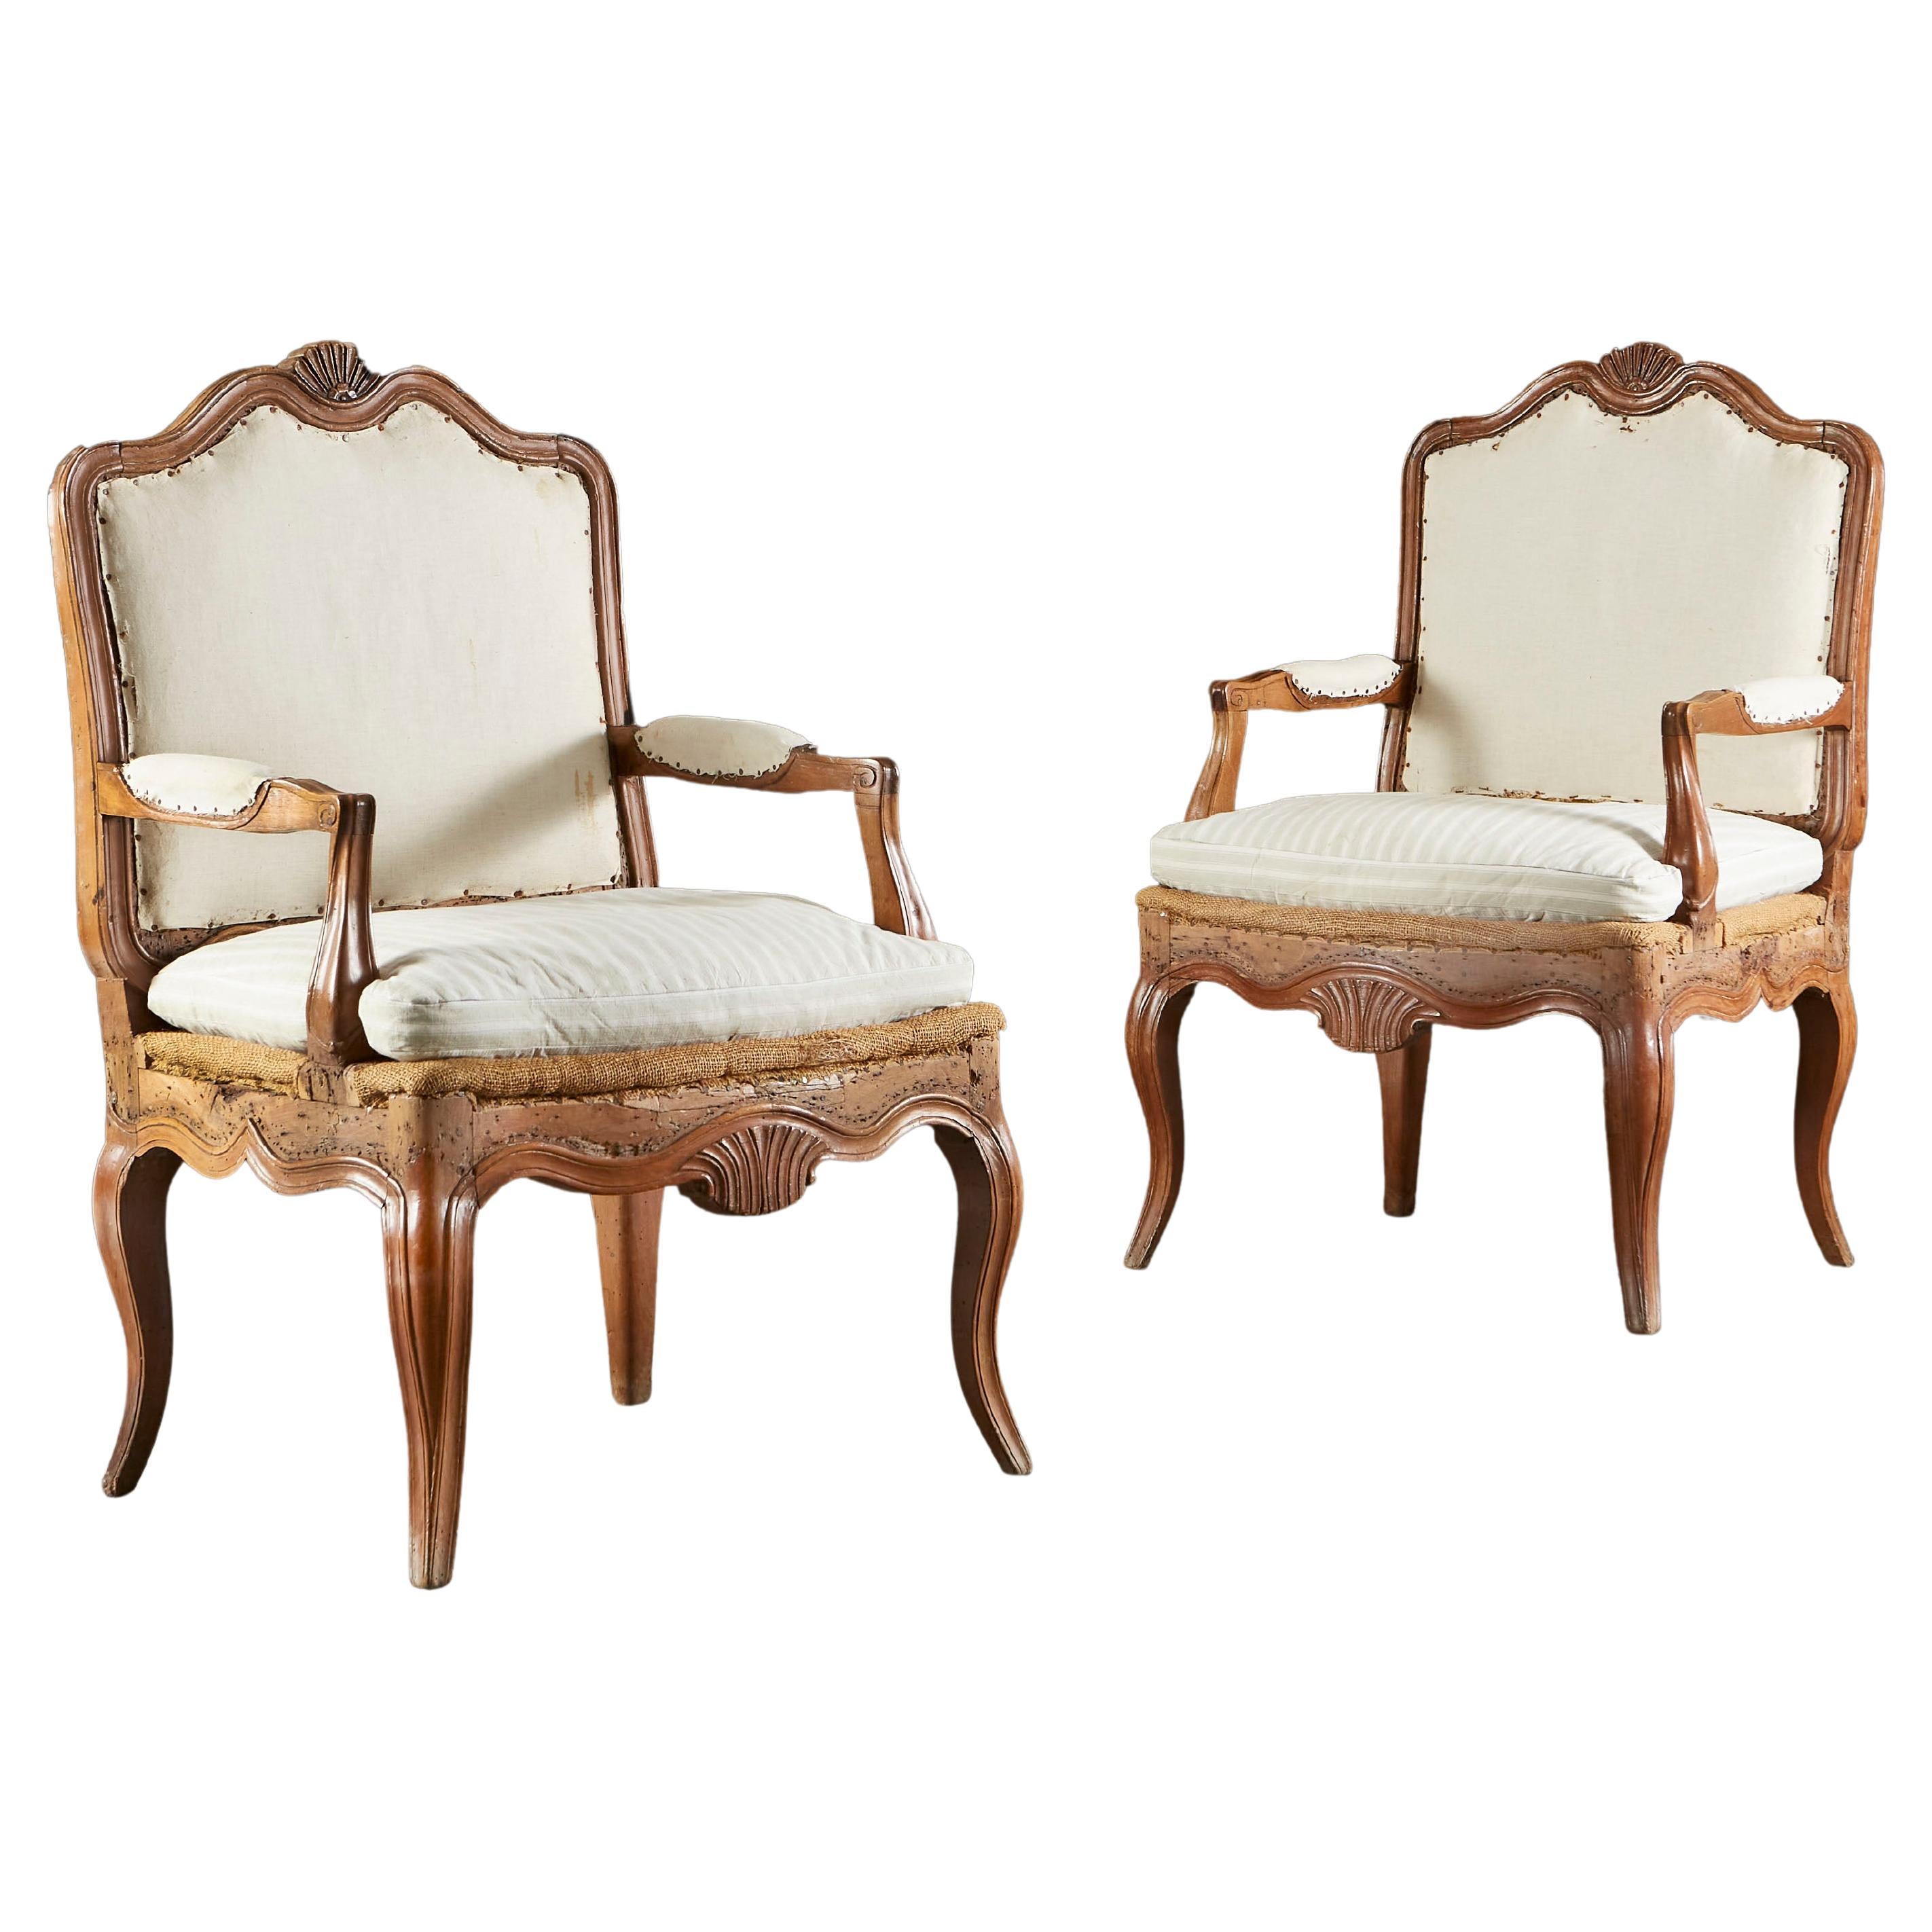 Pair of Early 19th Century French Open Armchairs